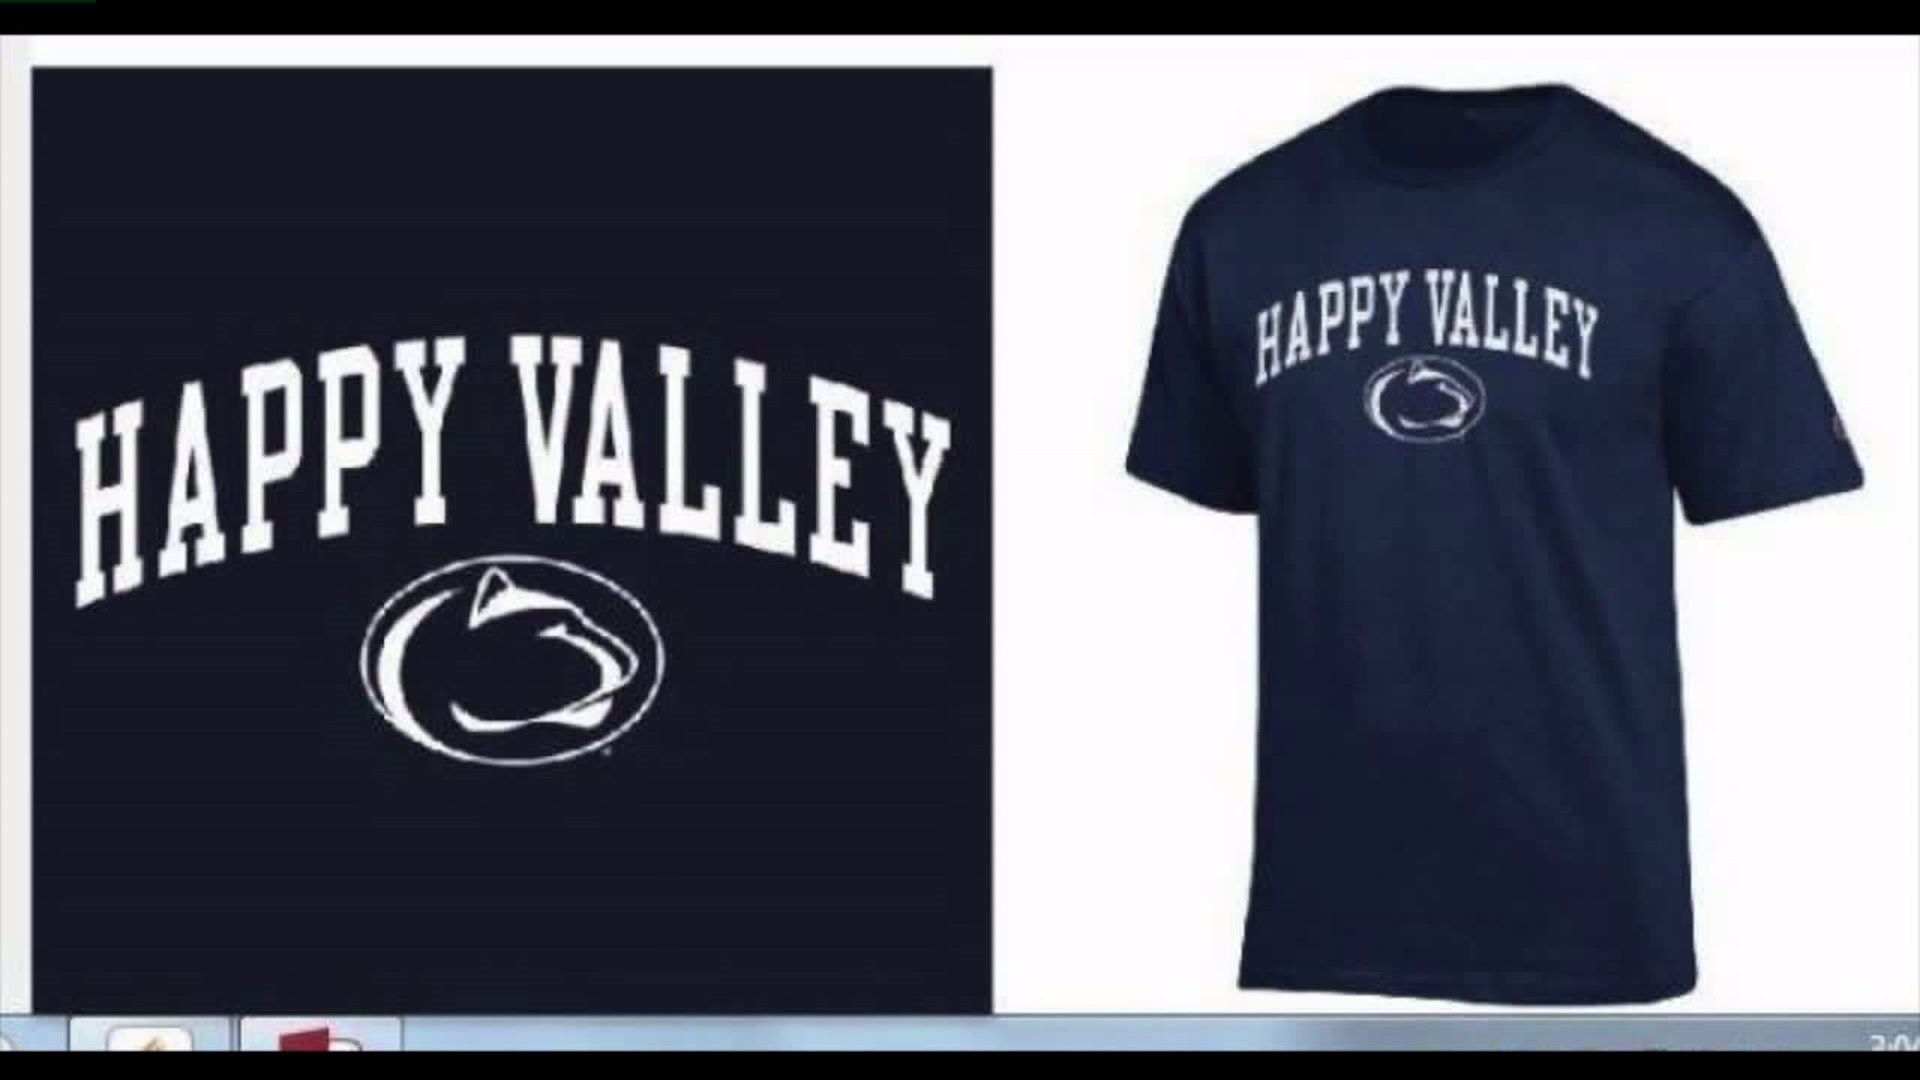 Penn State Looking to Trademark 'Happy Valley'